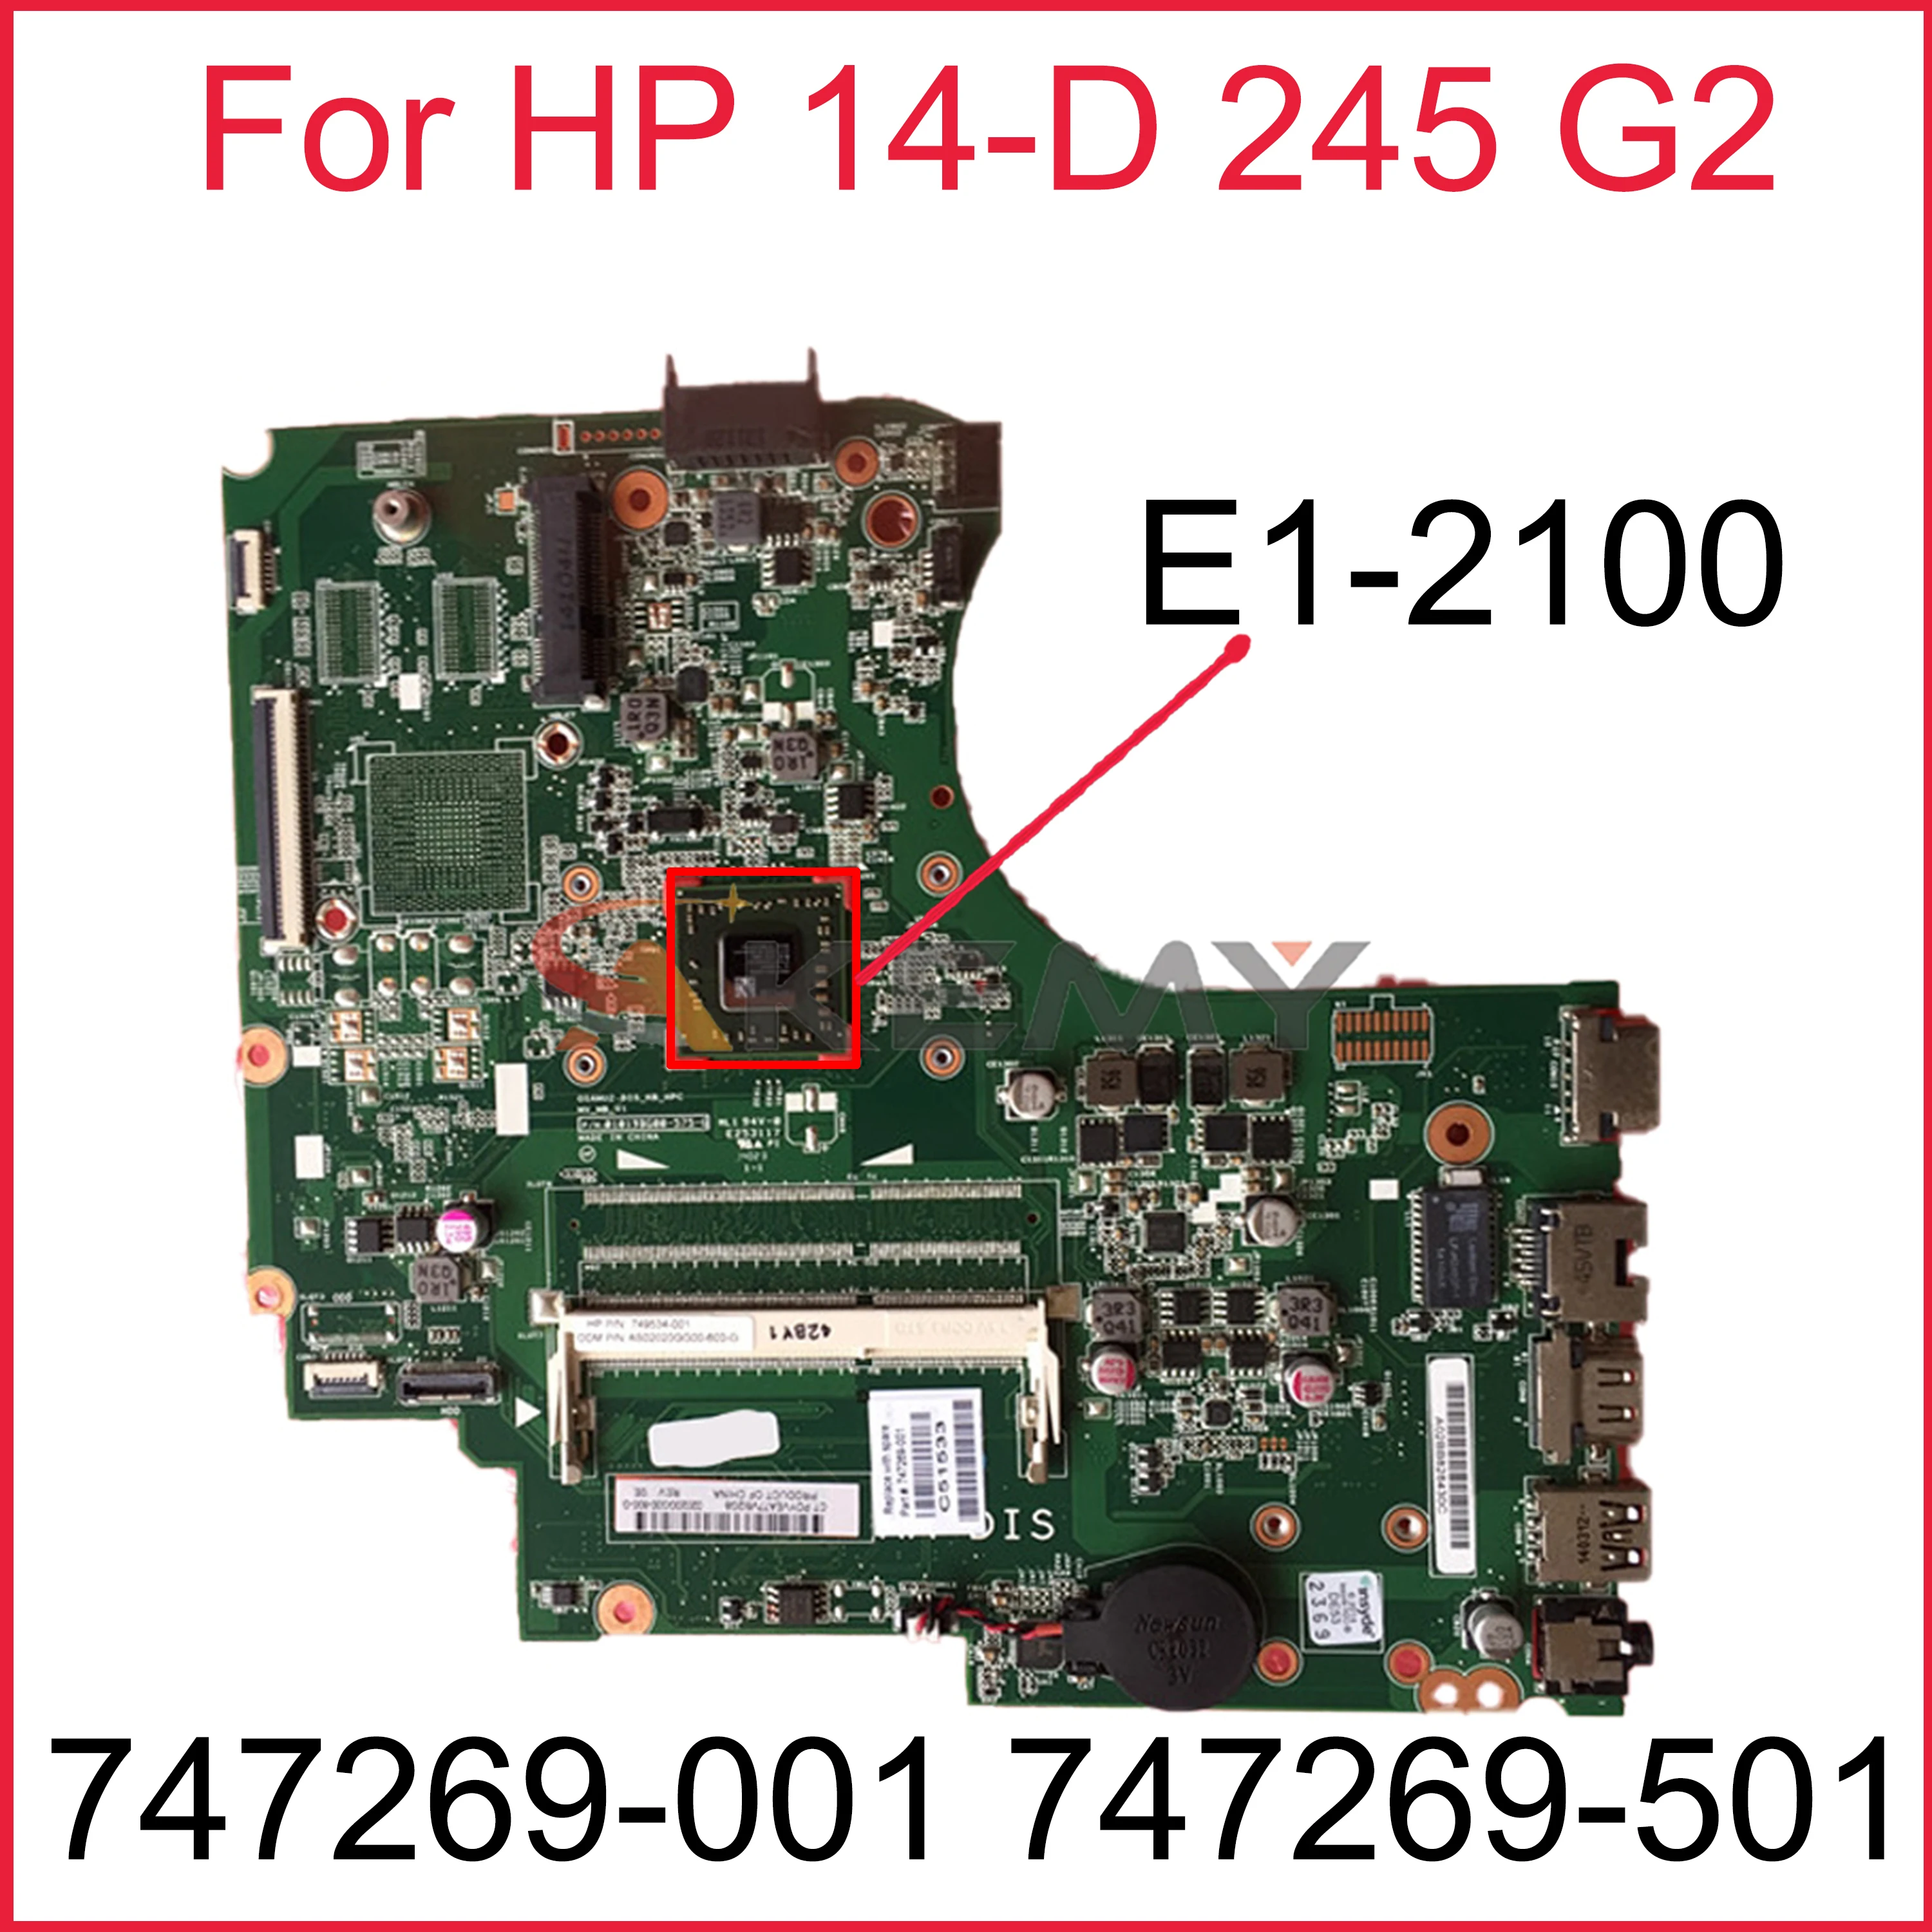 

747269-001 FOR 14-D 245 G2 Laptop Notebook Motherboard P/N:01019BG00-491-G E1-2100 Mainboard 747269-501 100%tested